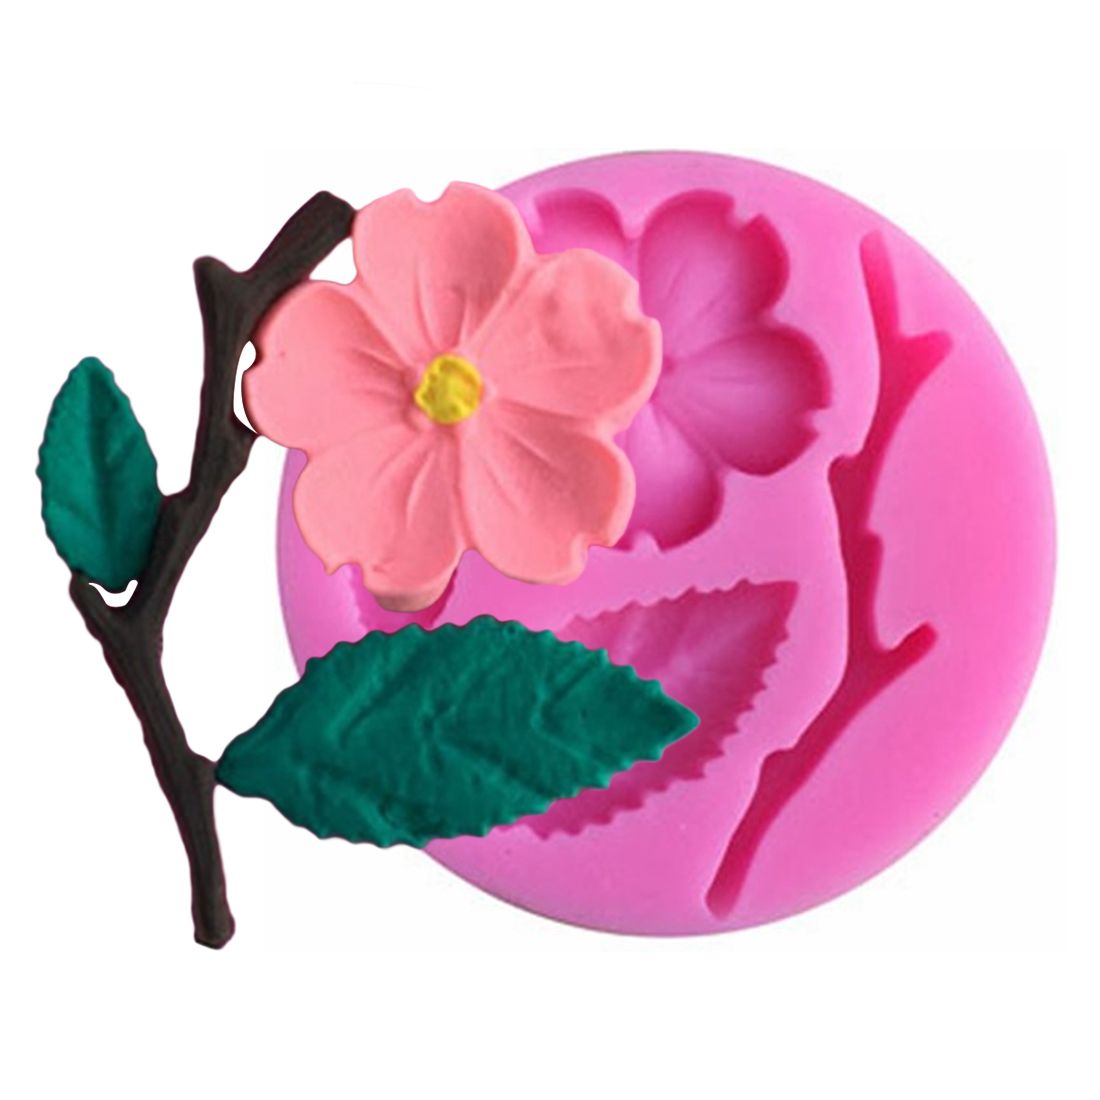 3D Food-grade Silicone Mold Peach Blossom Cake Decorating Tool Candy Baking Mold